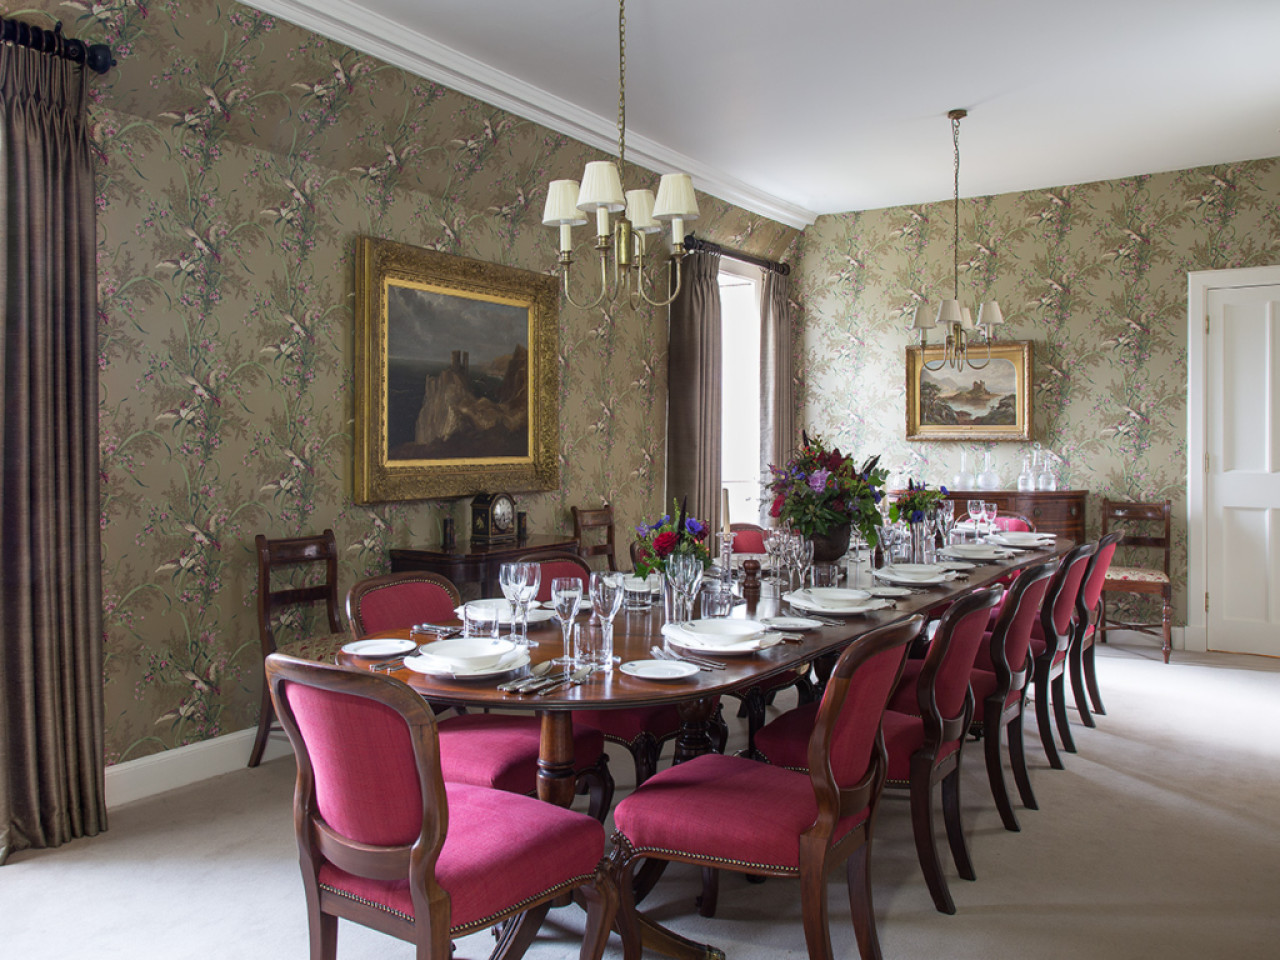 Stay at Abbotsford, Dining Room